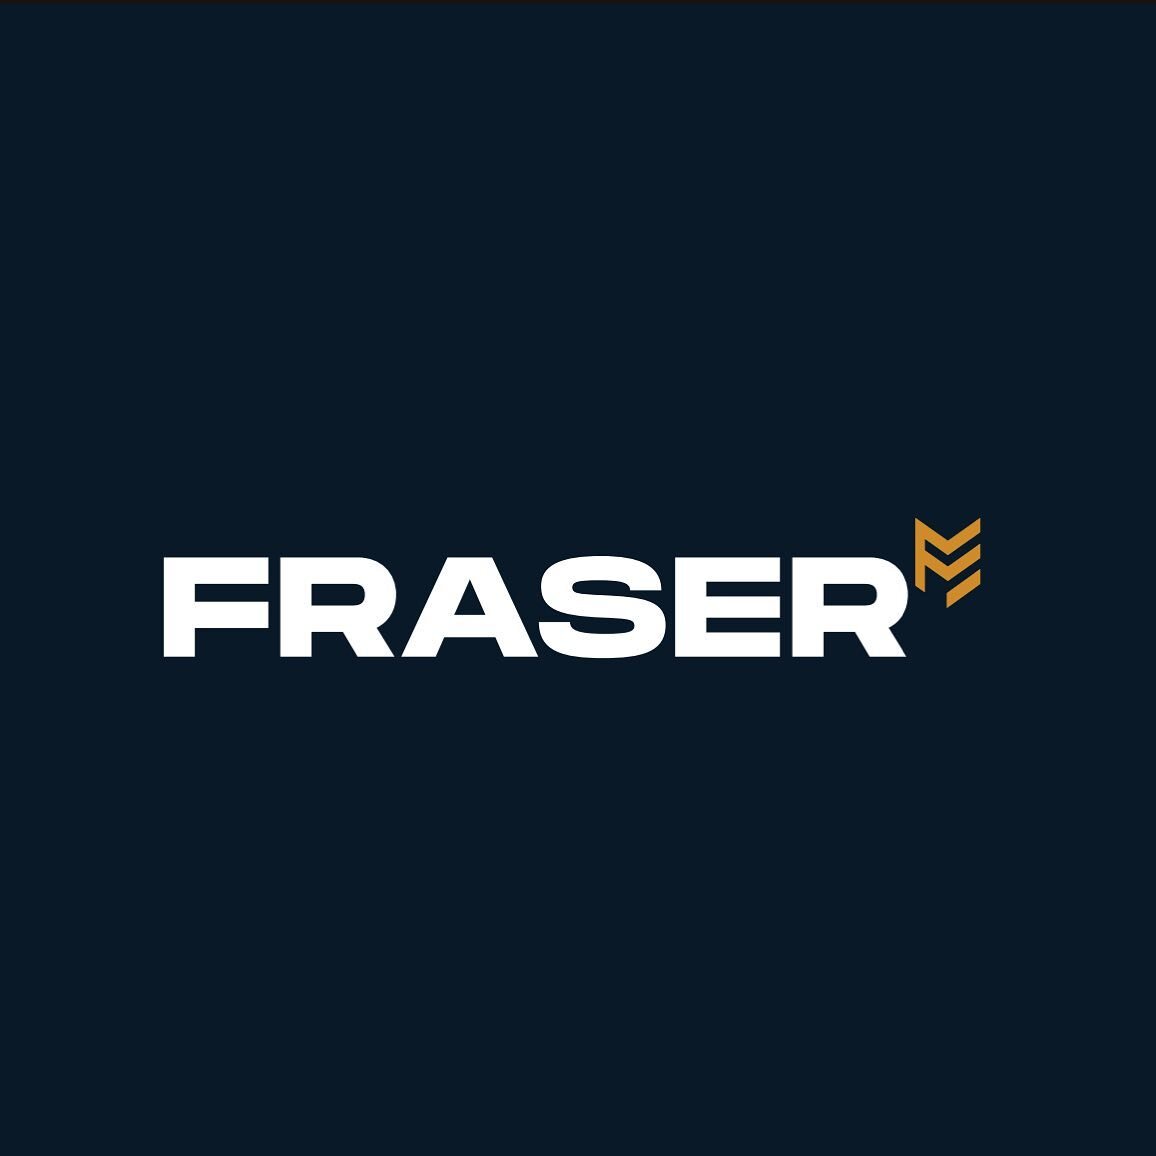 A slick new corporate brand for @fraserearthworks using a cleaner more modern look and feel but showcasing the years in the business through a trust crest made of the FE earthy gold popping against a sleek deep navy #brandidentity #logotype #branding